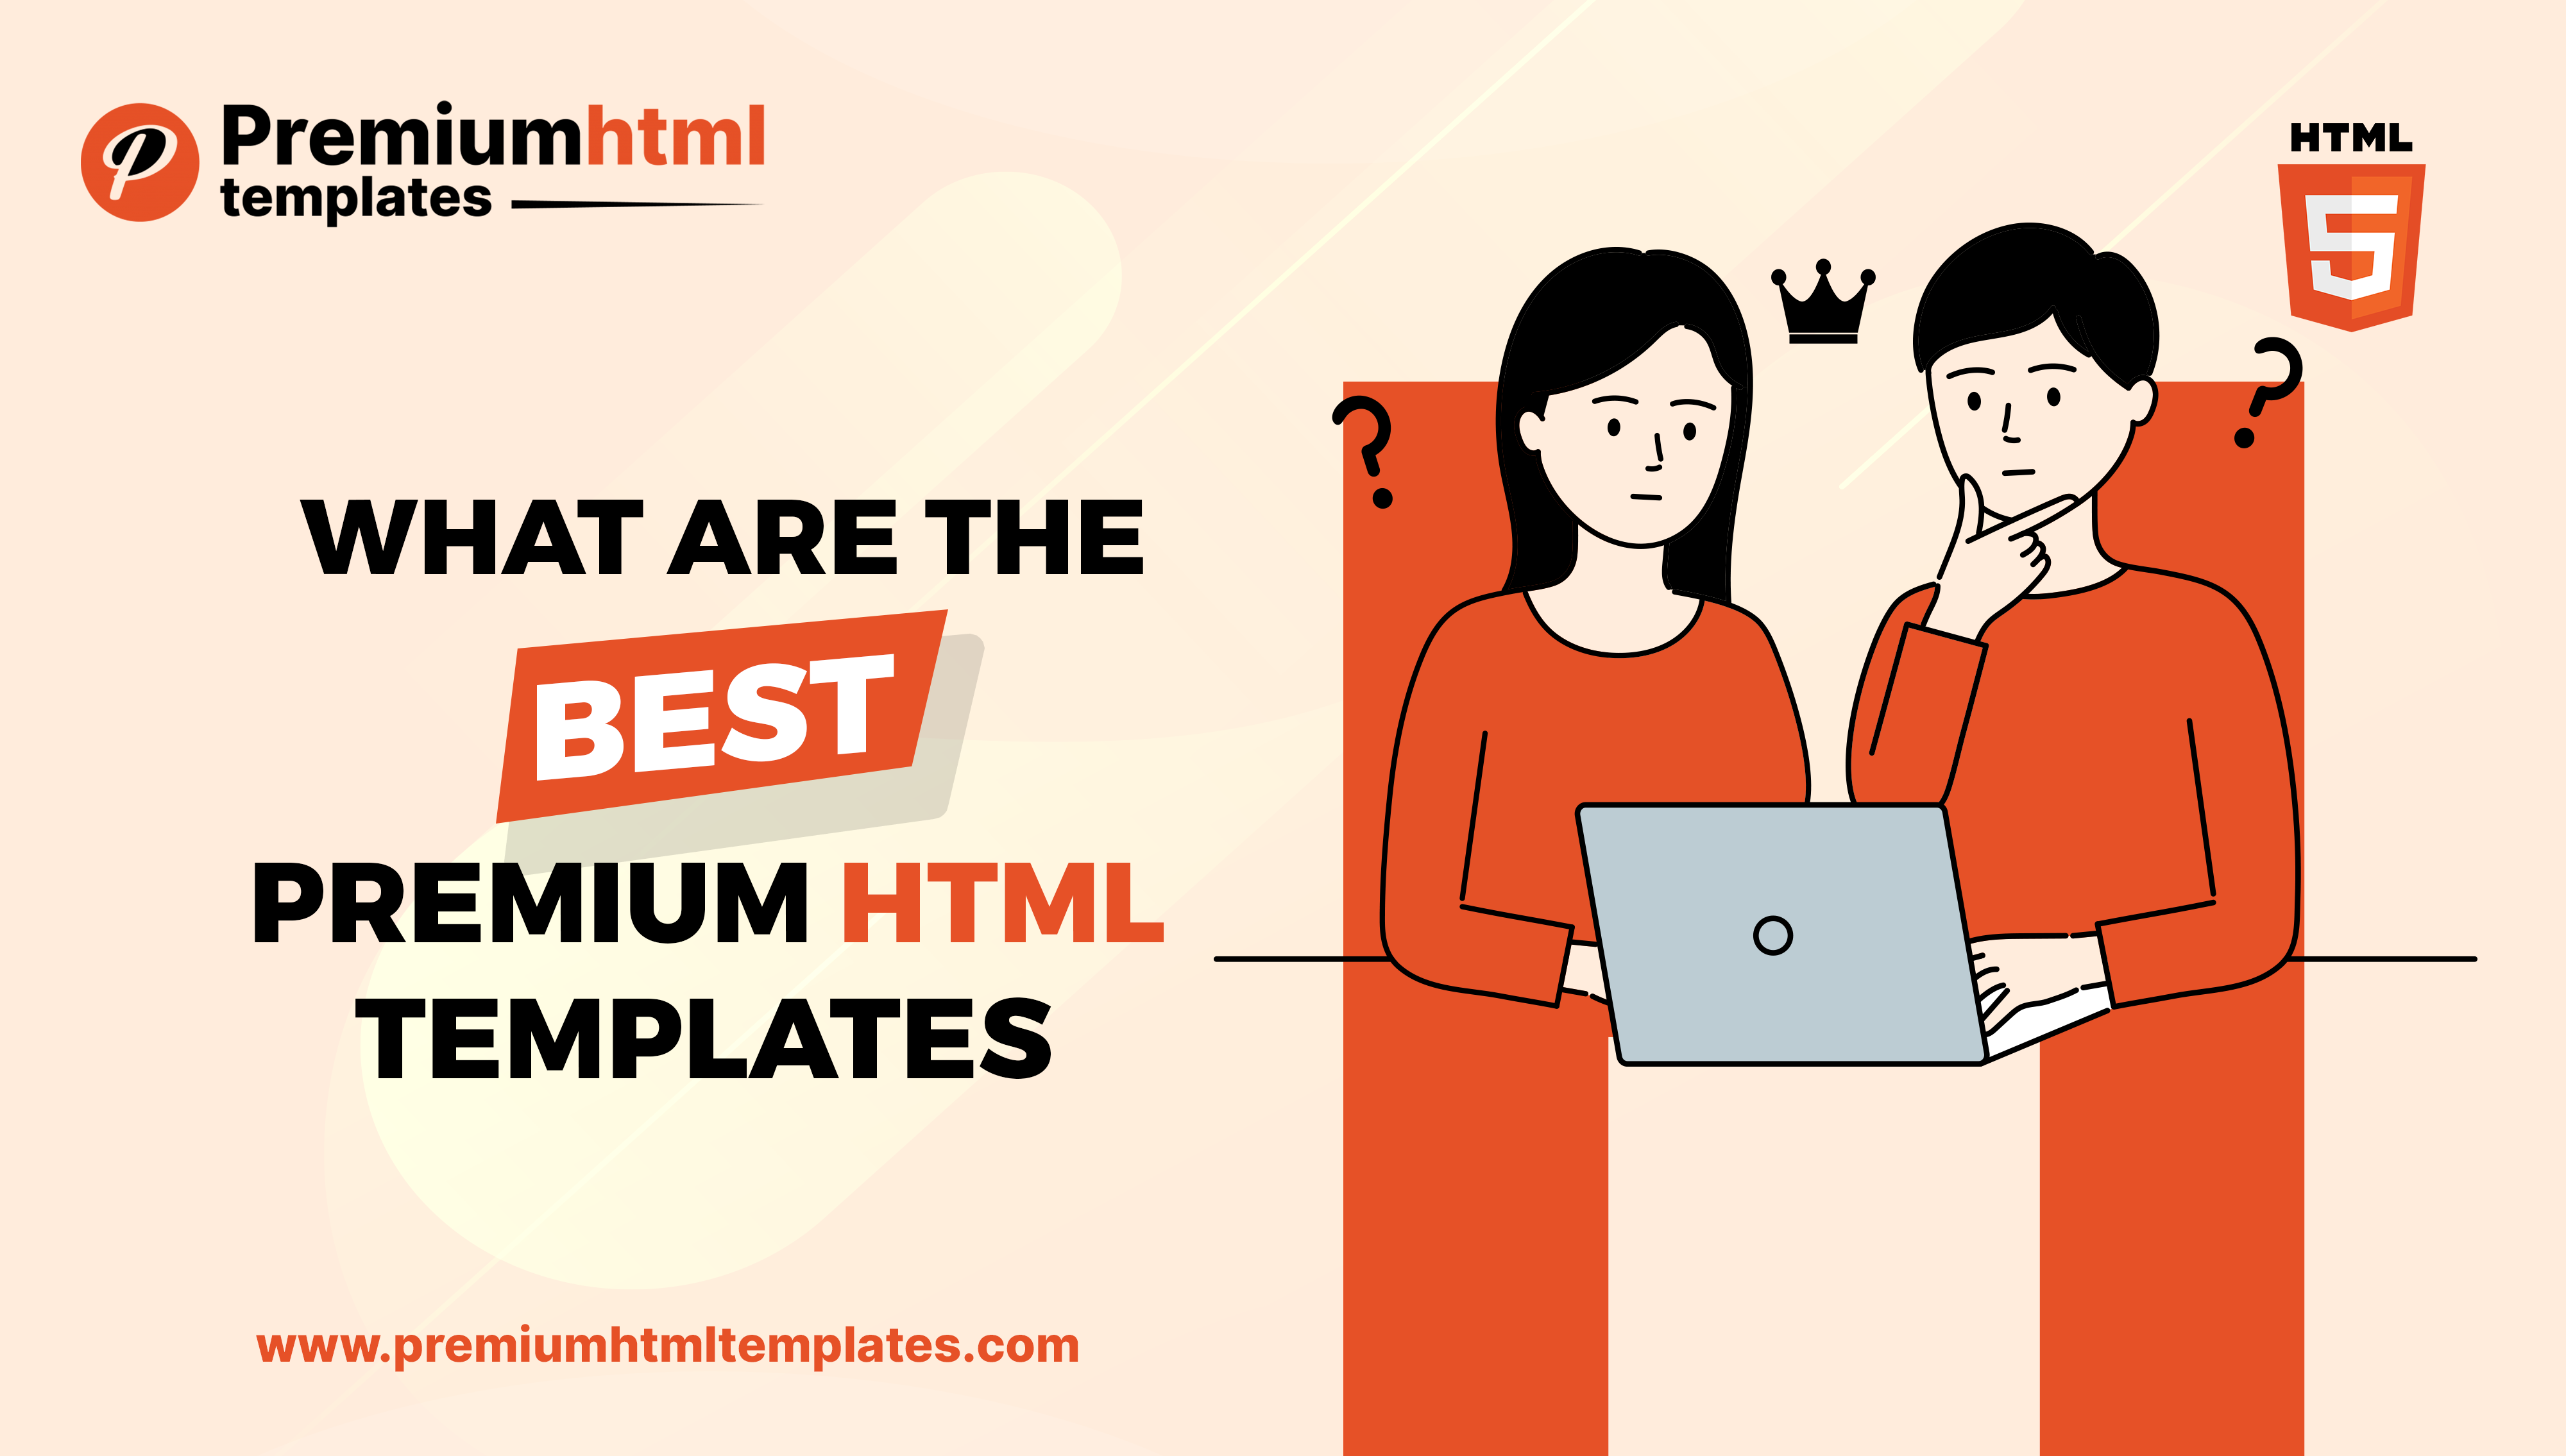 What are the best Premium html templates